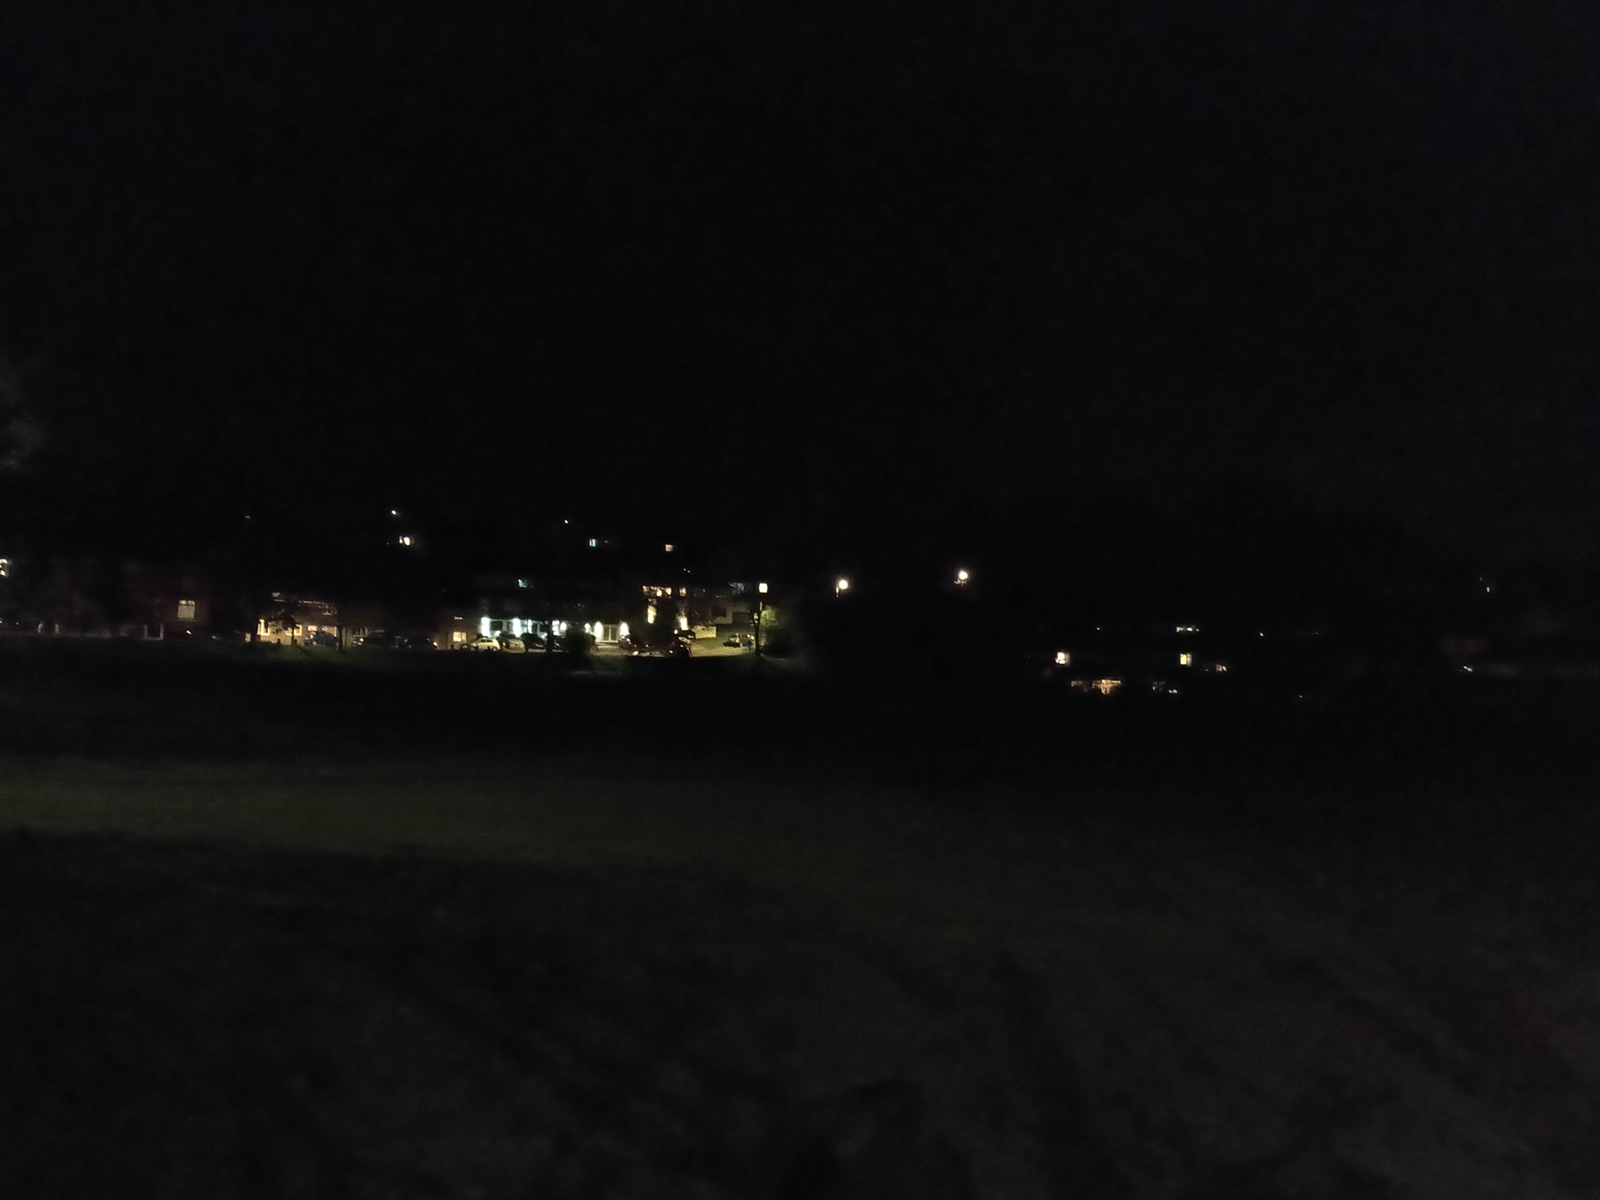 Moto G22 camera sample showing a park at night in night mode